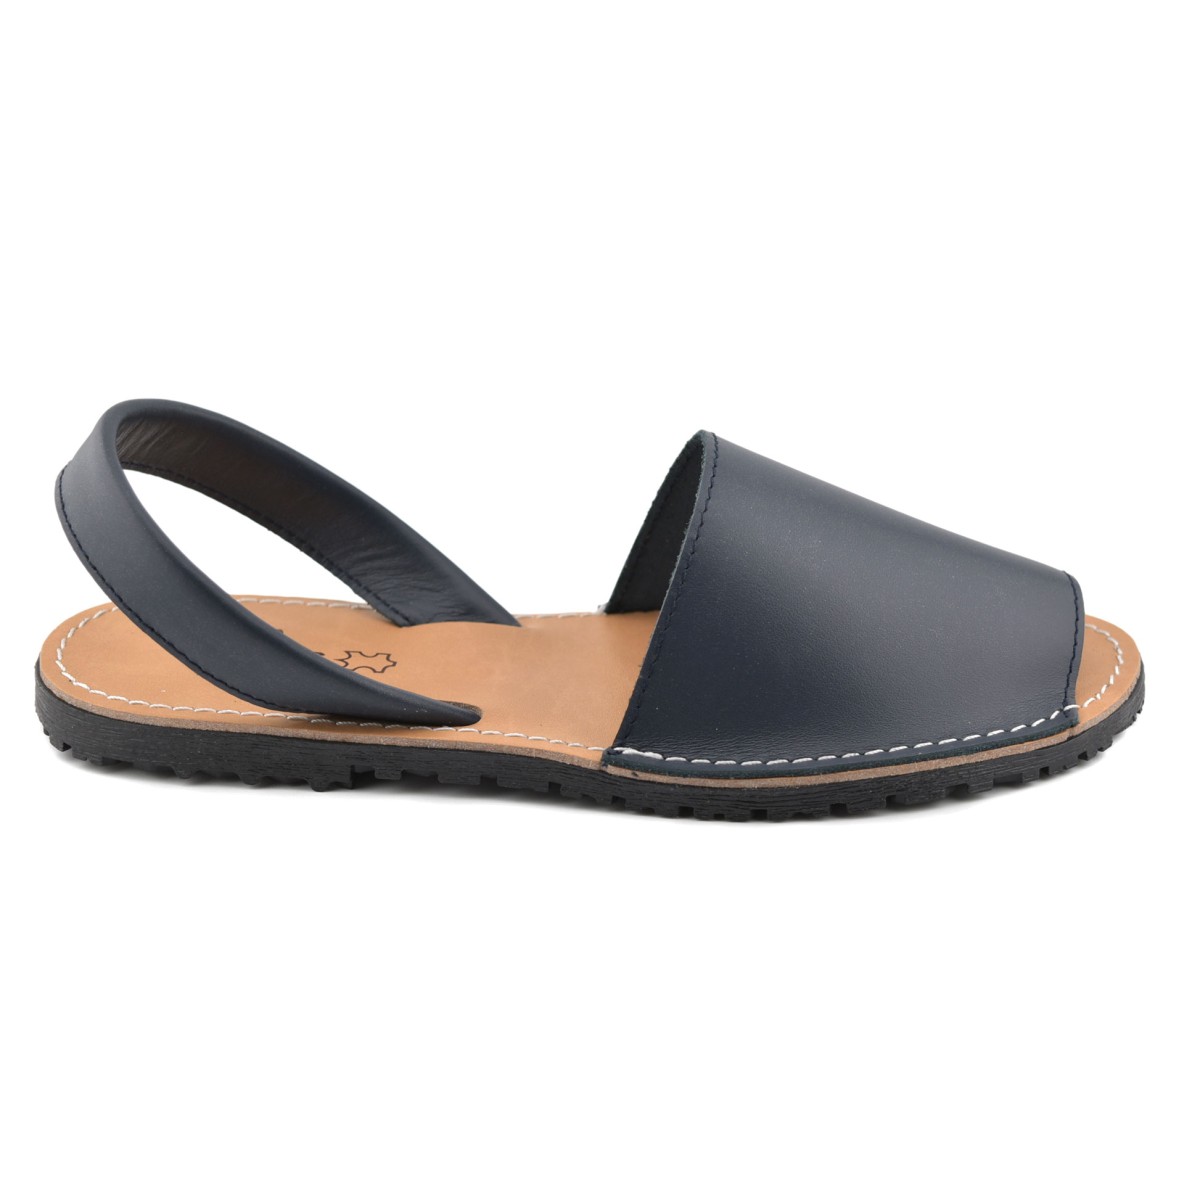 Avarcas Menorquinas navy leather sandals by CBP